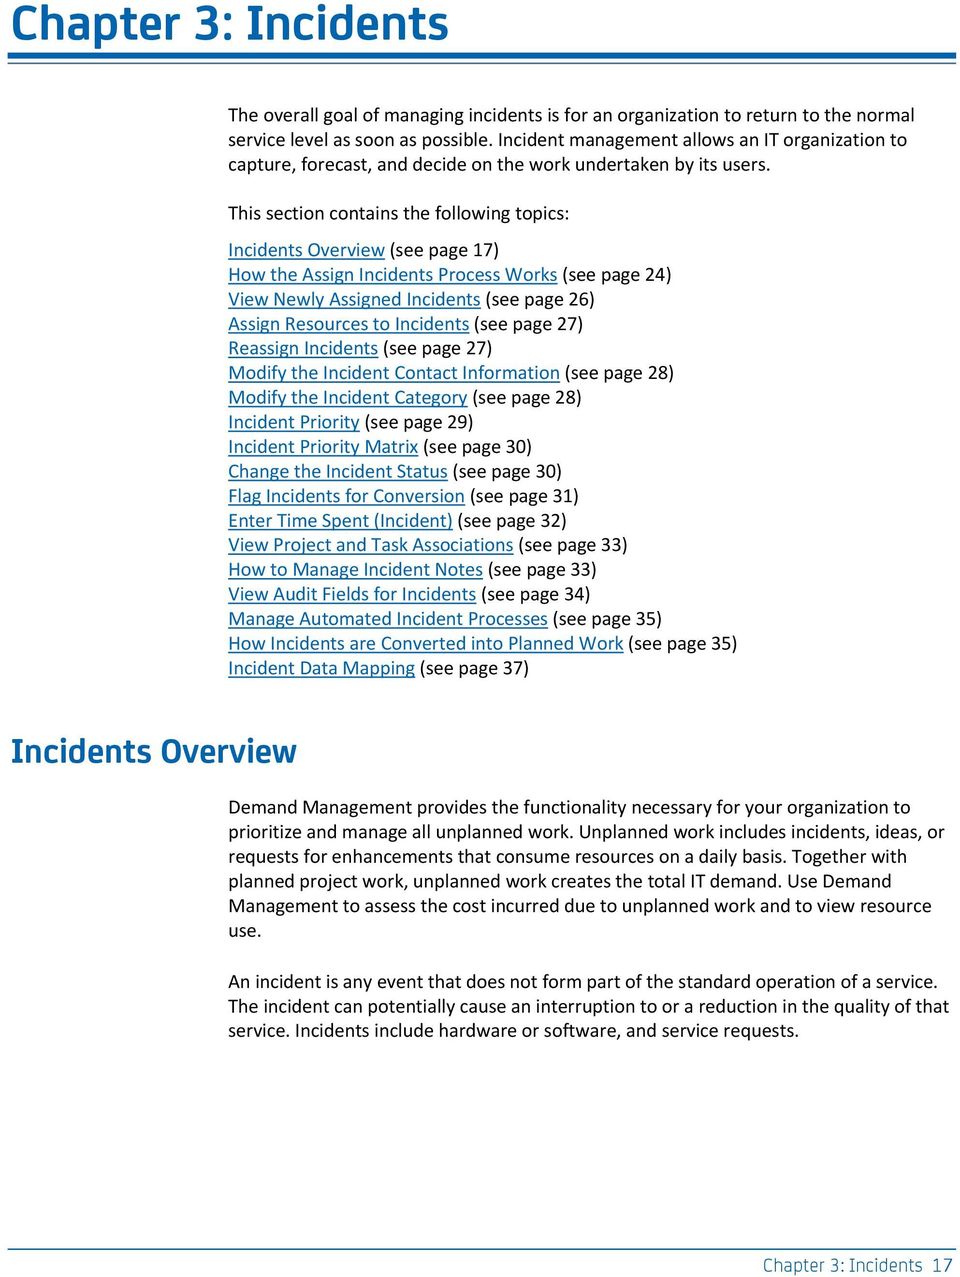 This section contains the following topics: Incidents Overview (see page 17) How the Assign Incidents Process Works (see page 24) View Newly Assigned Incidents (see page 26) Assign Resources to